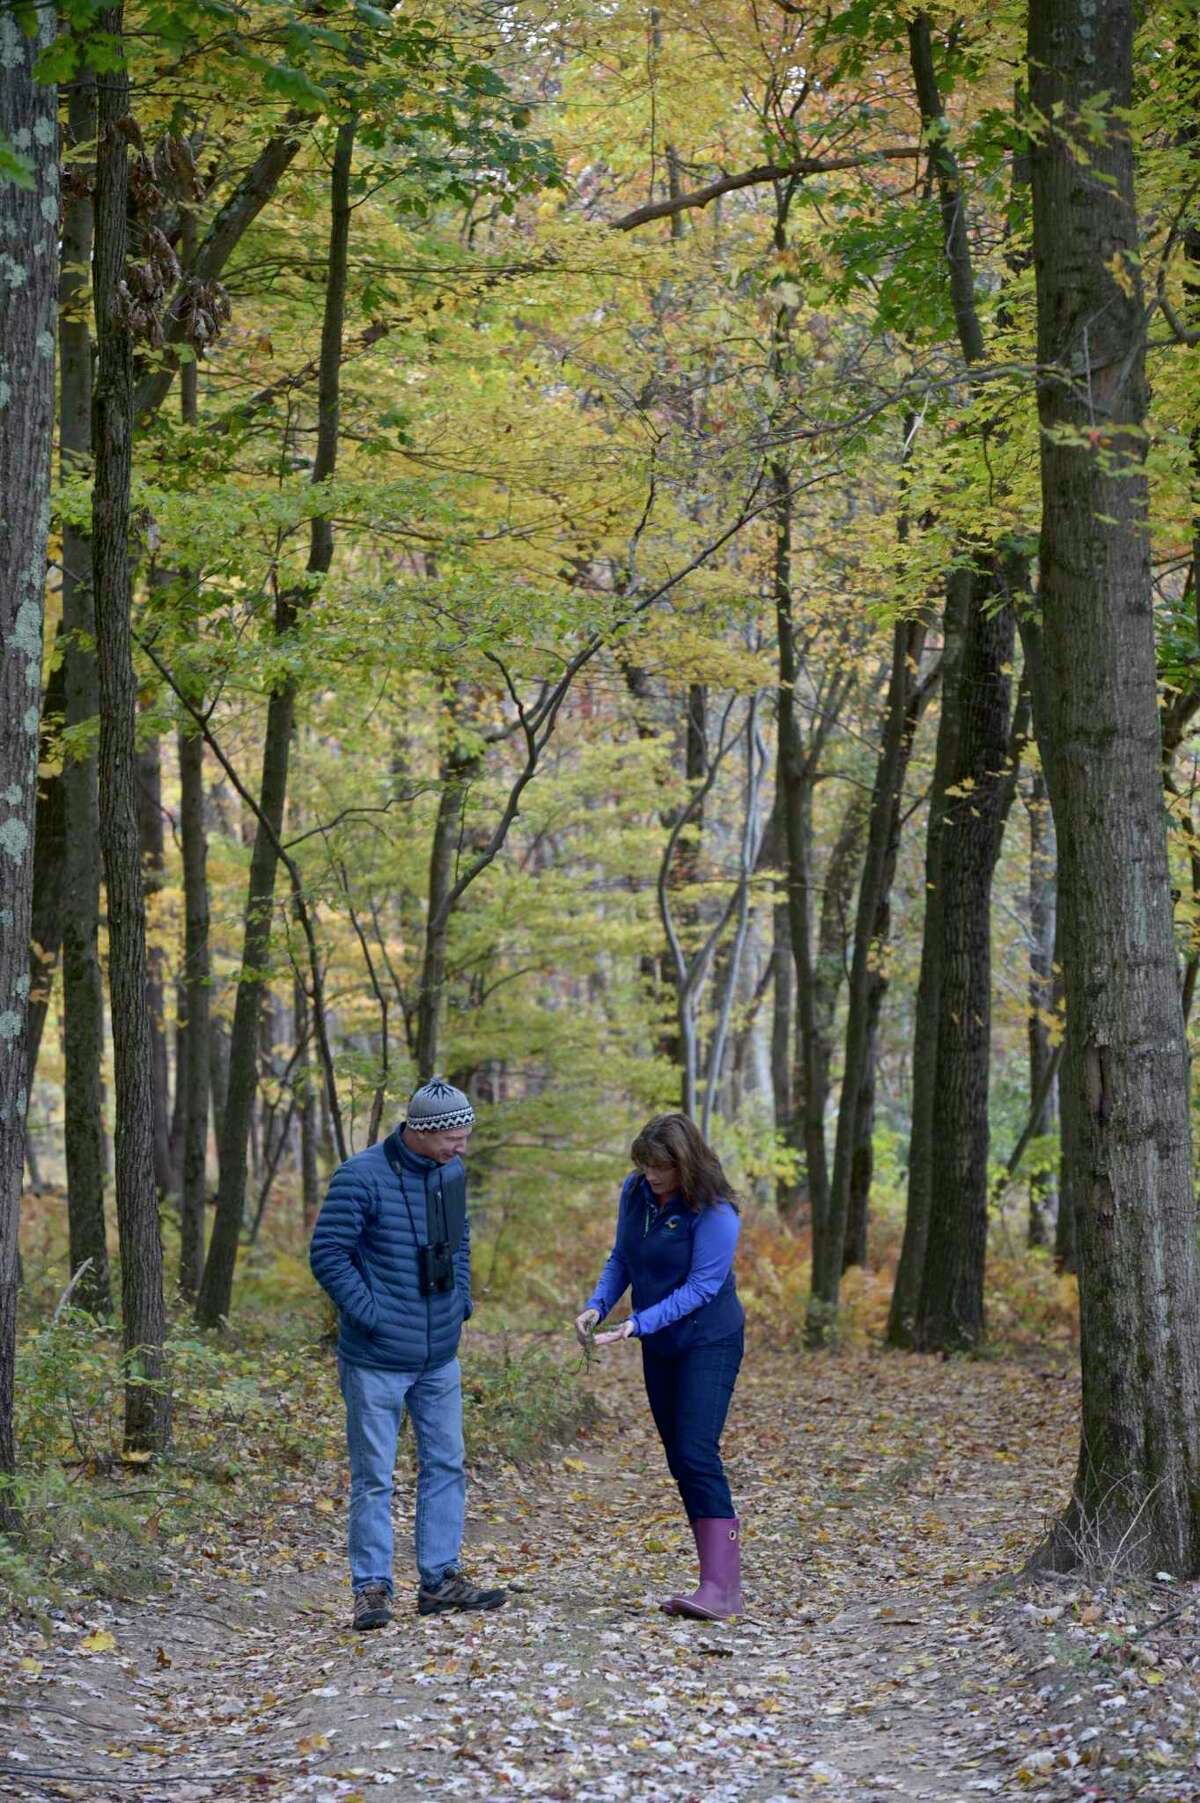 Director Cathy Hagadorn, right, and biologist Jim Arrigoni on one of the trails at Deer Pond Farm in Sherman. Like many places in the state, dear Pond has lost a number of trees to the invasive emerald ash borer. They are using the tree losses to create new spaces that will attract birds. Wednesday, October 16, 2019, in Sherman, Conn.